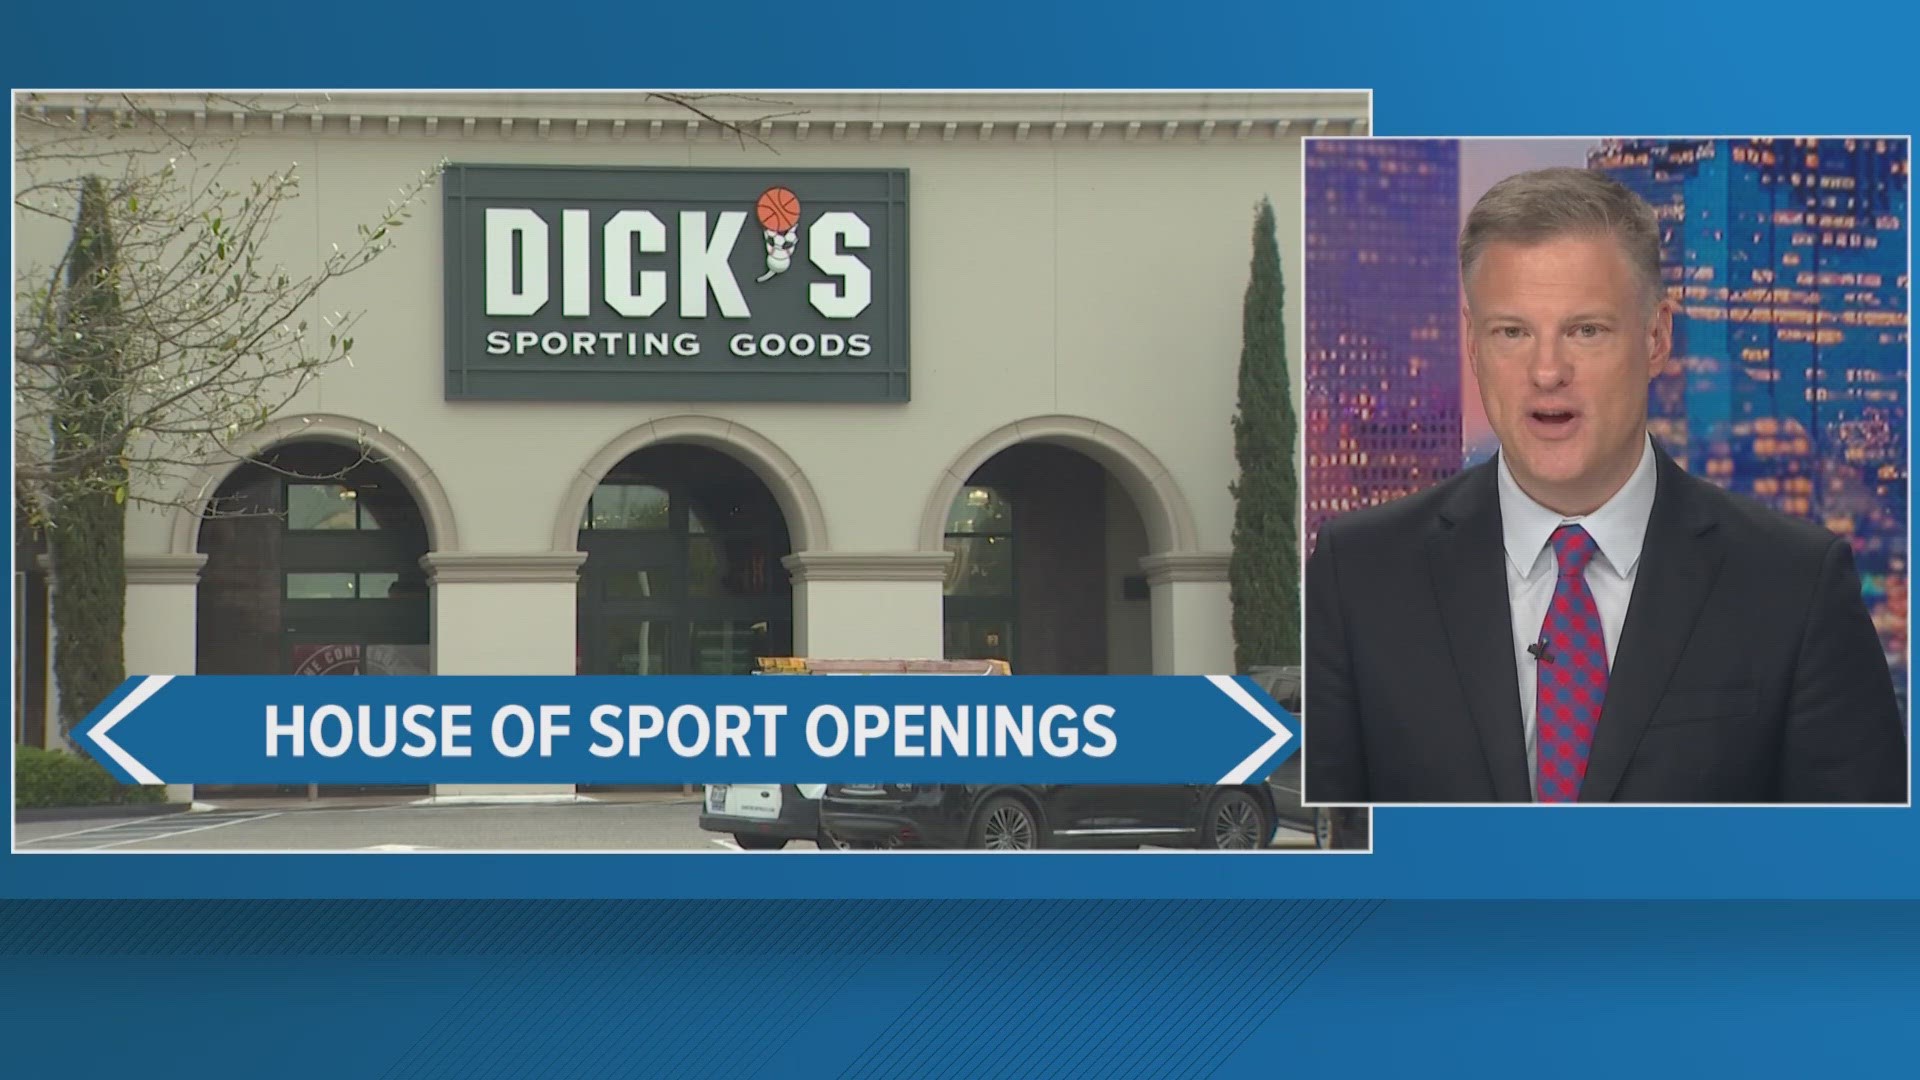 This weekend, Dick's Sporting Goods is opening up two House of Sport locations in the Greater Houston area.